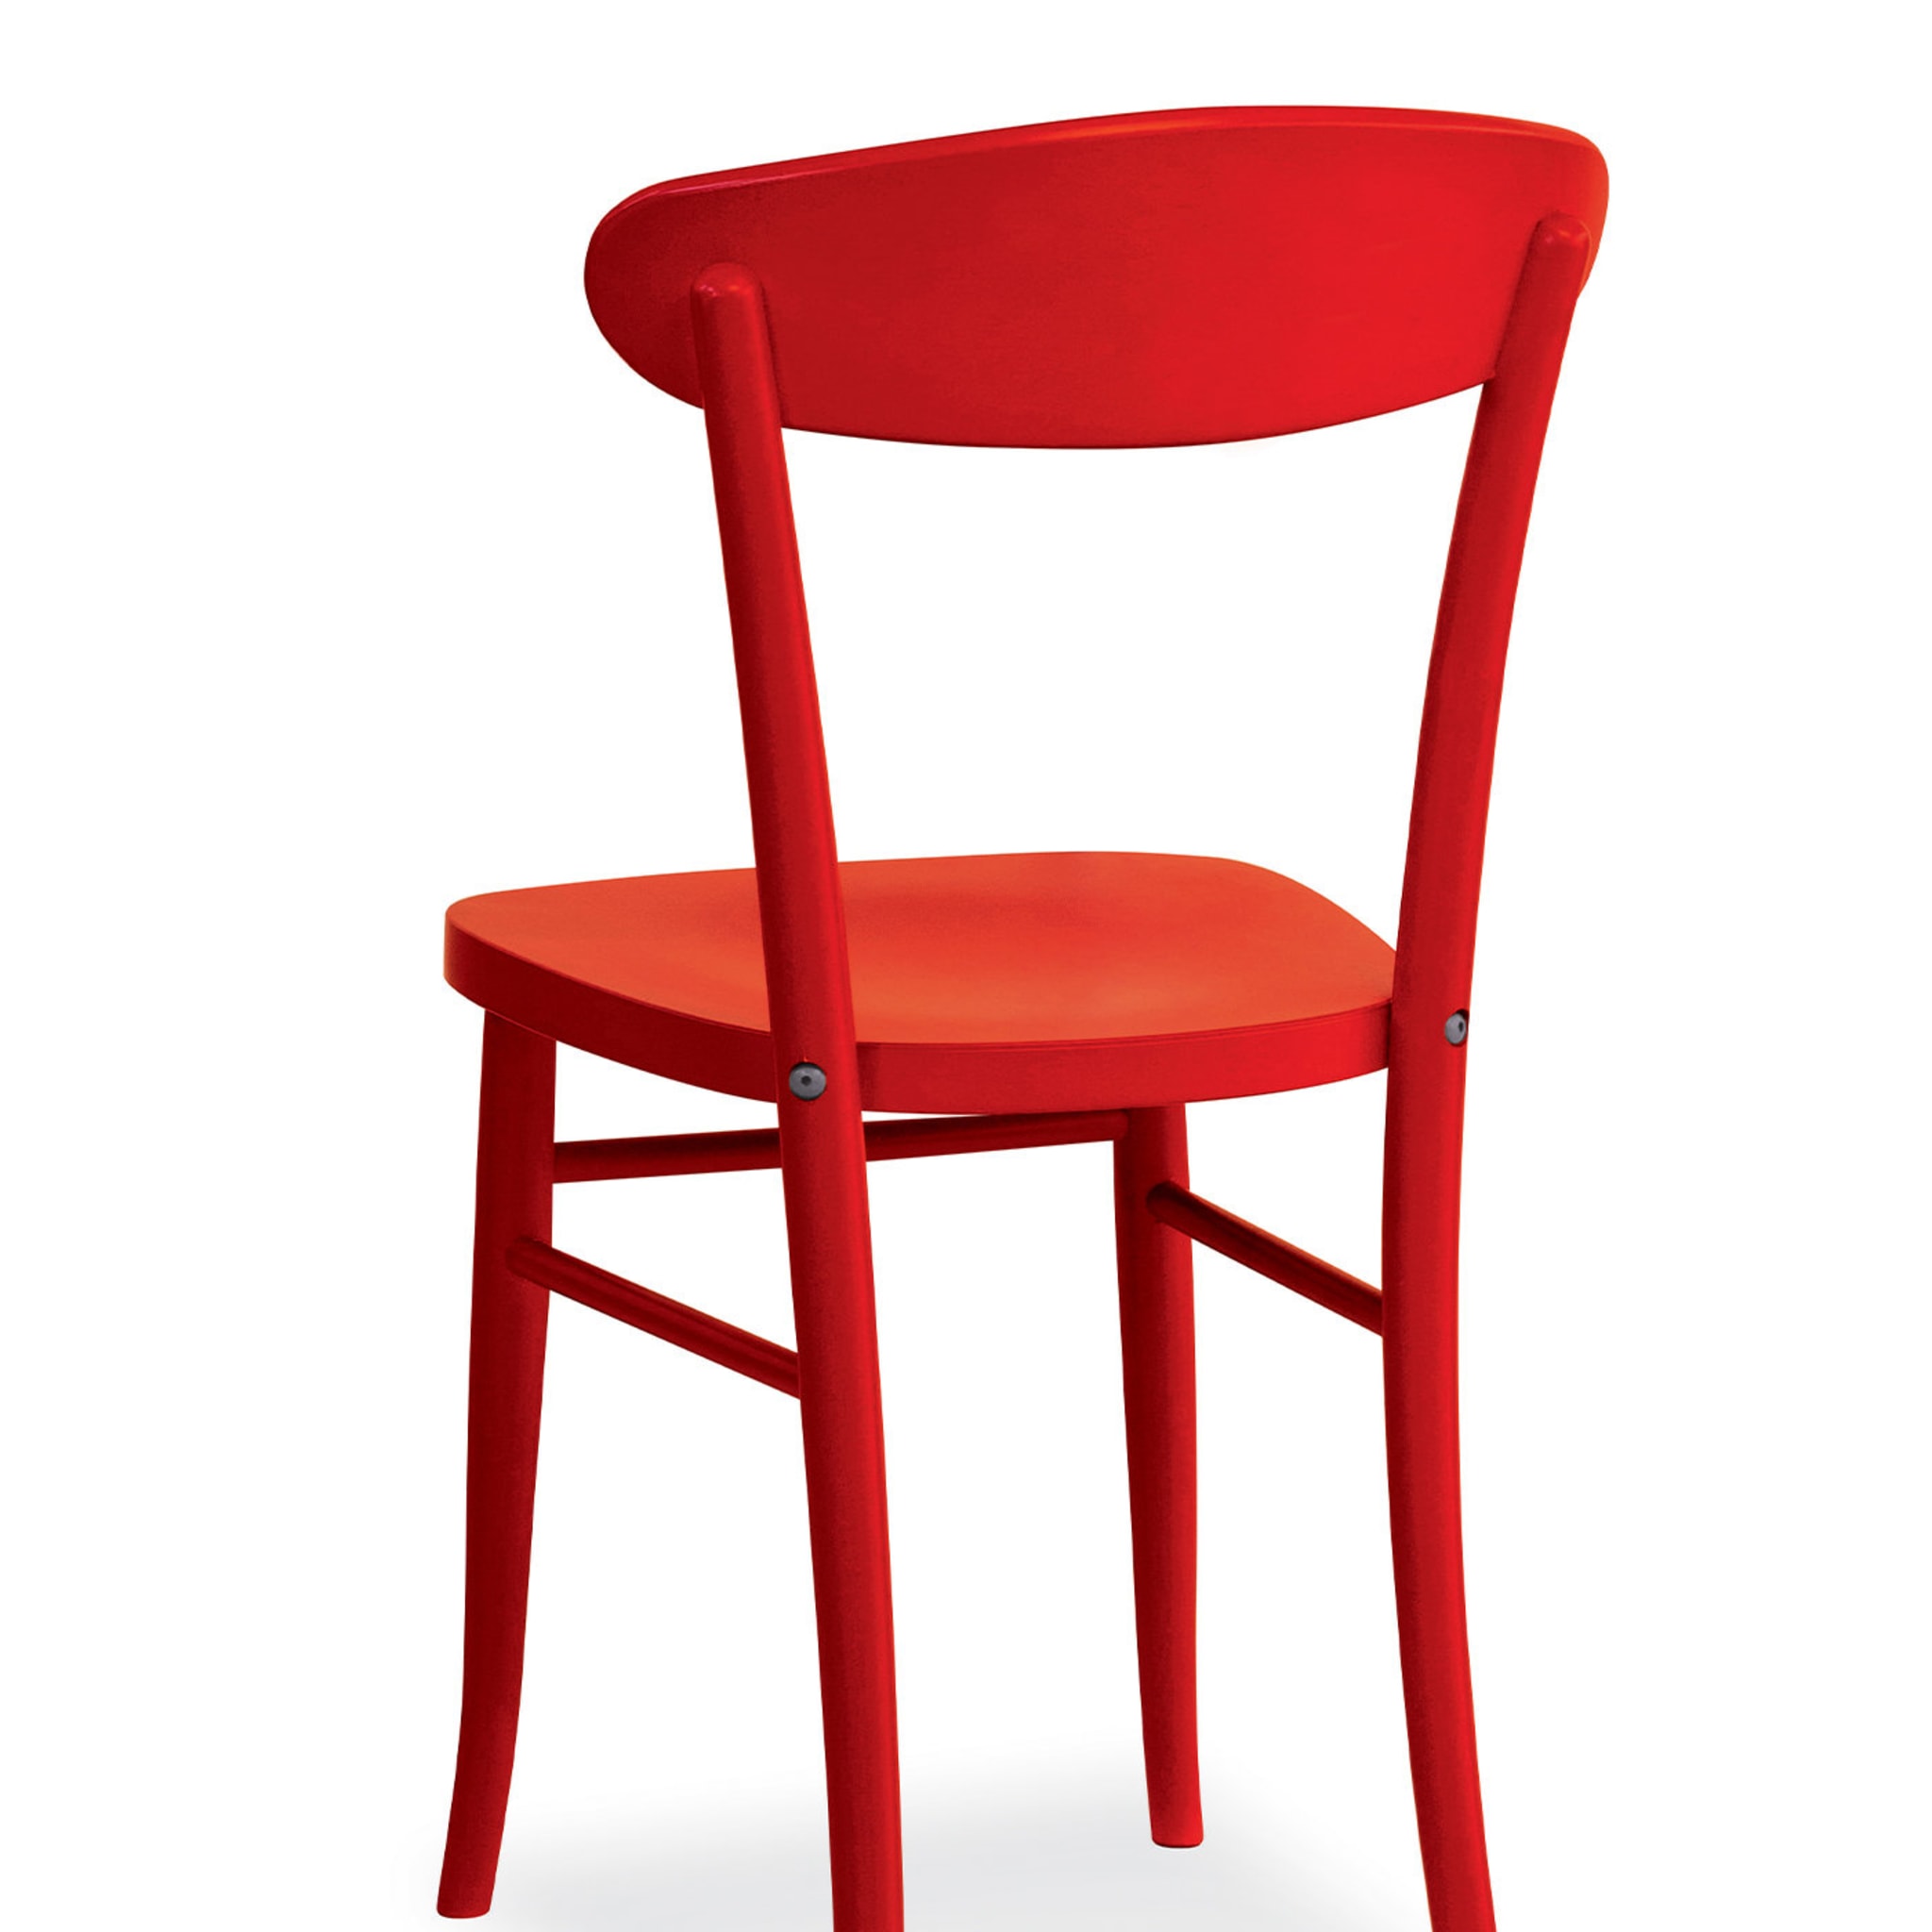 Pamela Set of 2 Red Chairs - Alternative view 1